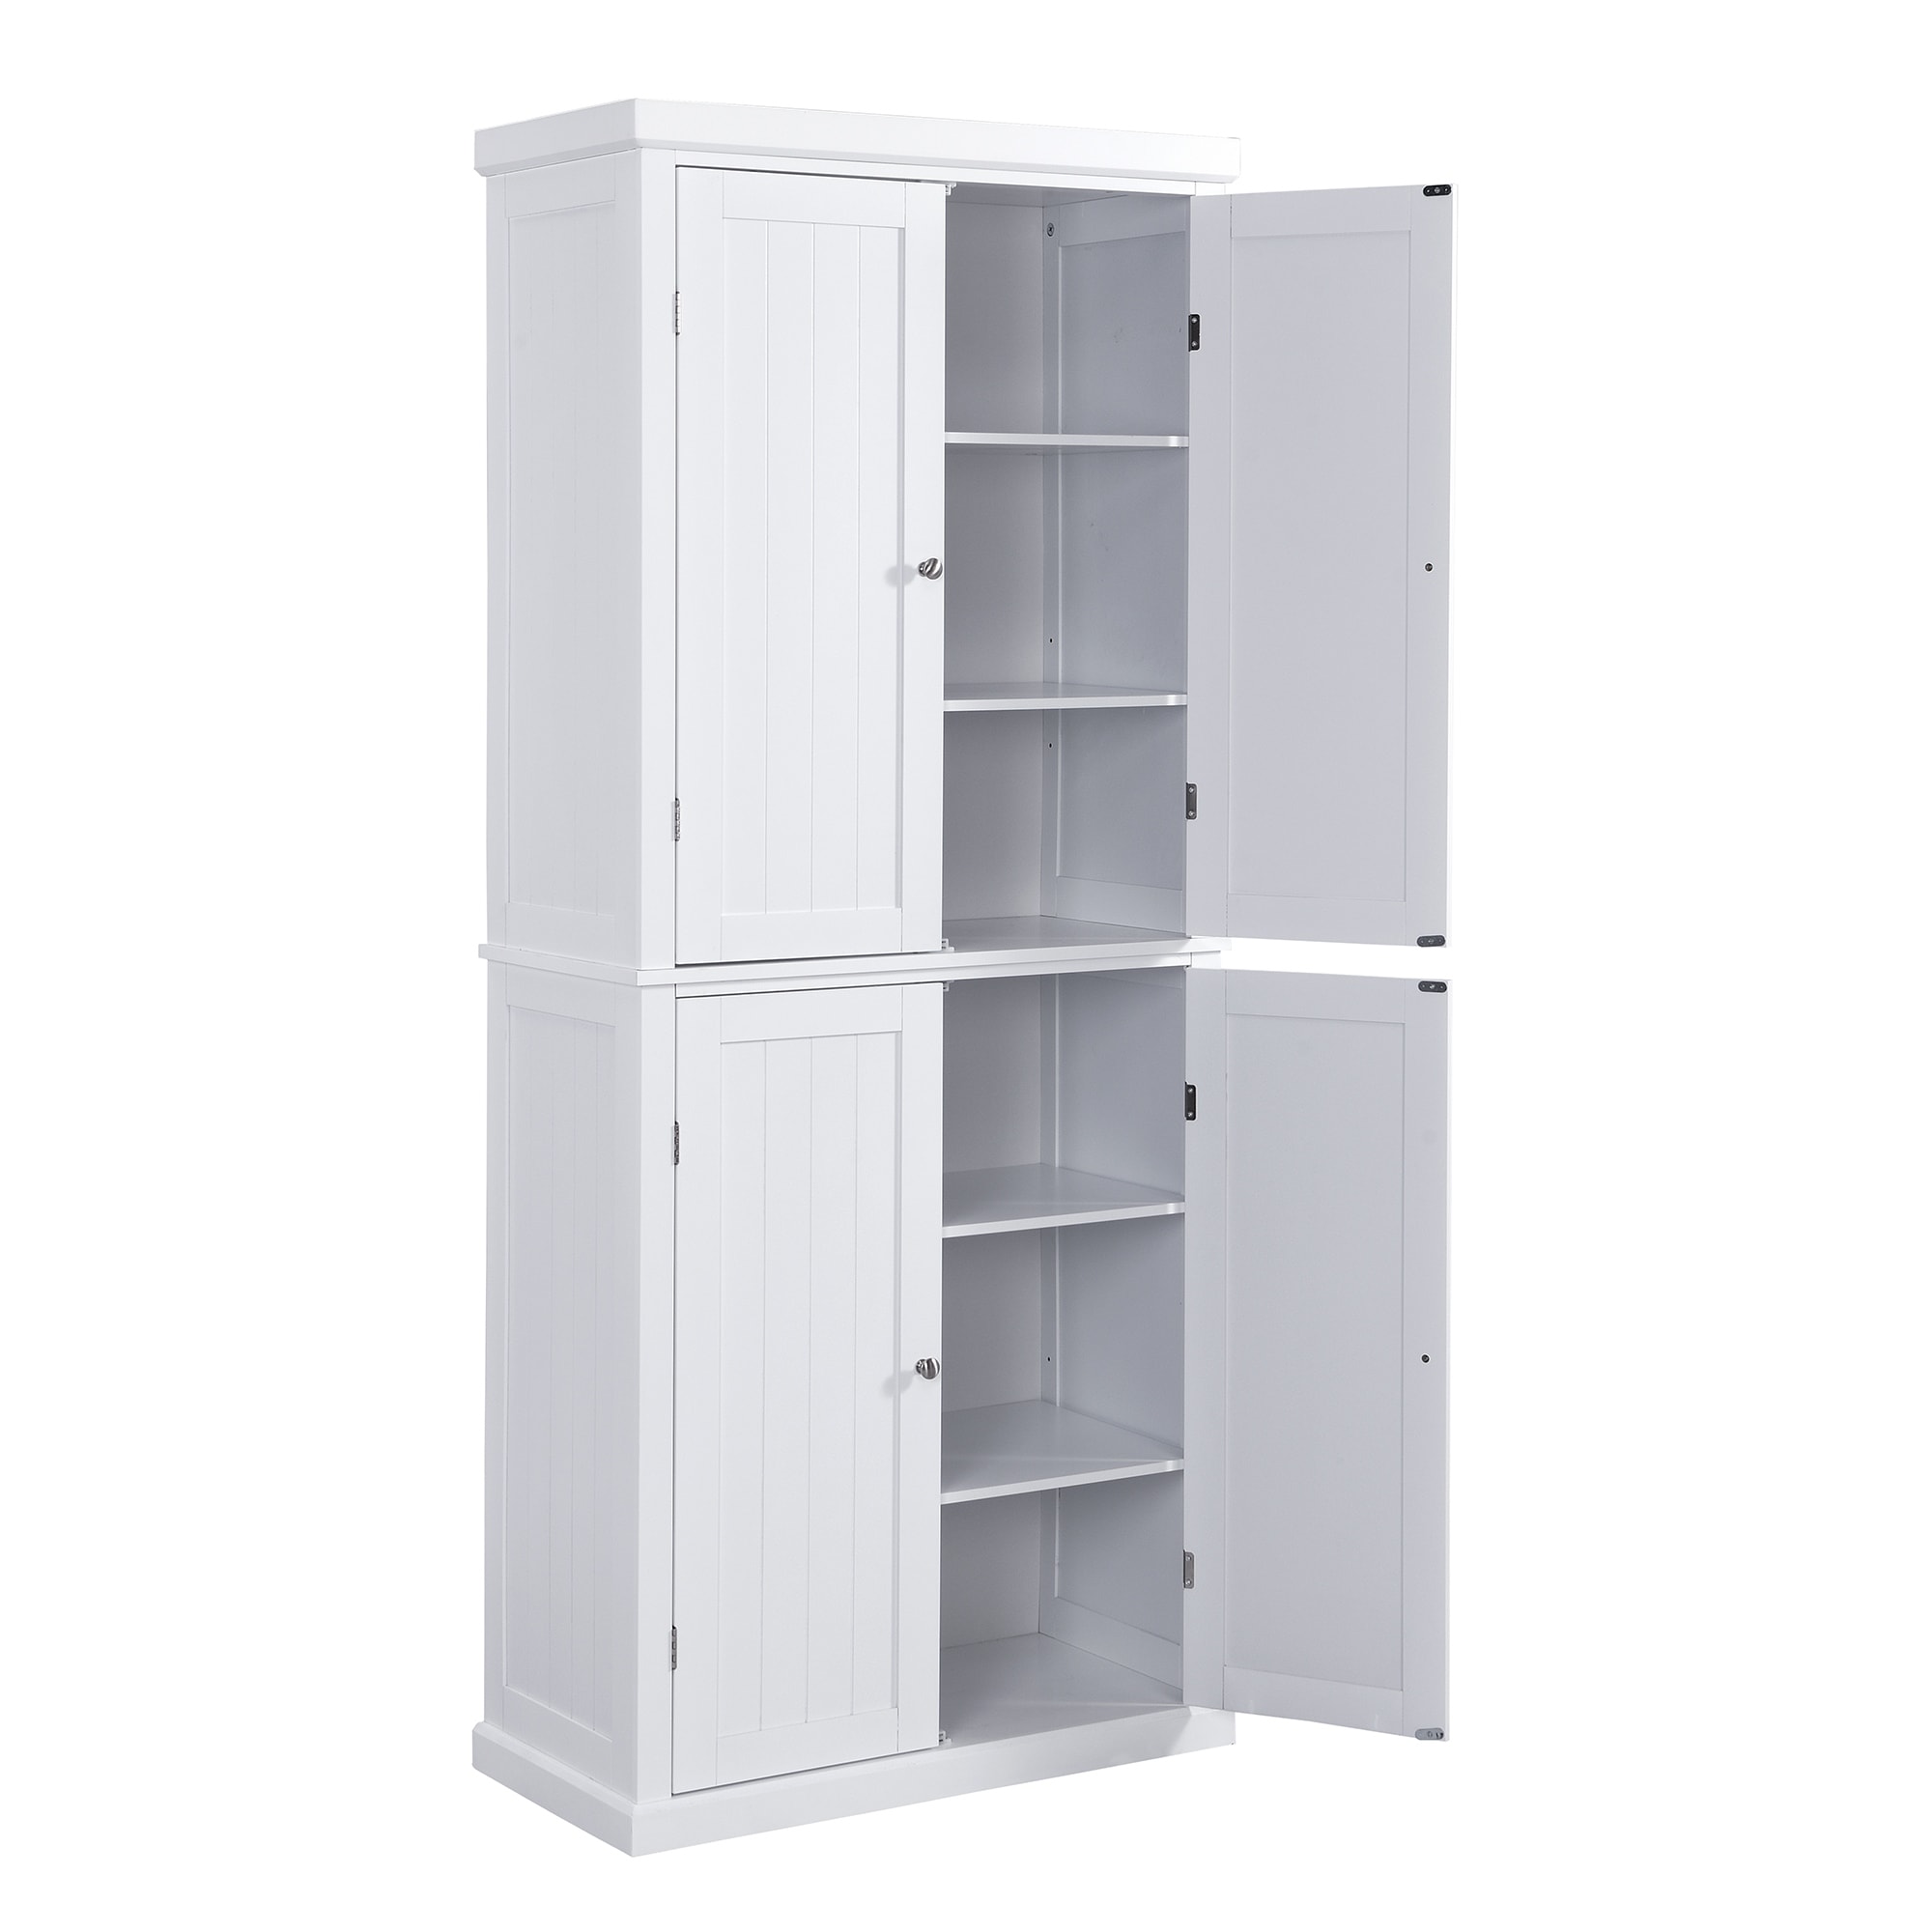 https://ak1.ostkcdn.com/images/products/is/images/direct/27b8e6fdebf09c7836e1728216520e2e73bed455/Freestanding-Tall-Kitchen-Pantry%2C-72.4%22-Minimalist-Kitchen-Storage-Cabinet-Organizer-with-4-Doors-and-Adjustable-Shelves%2C-White.jpg